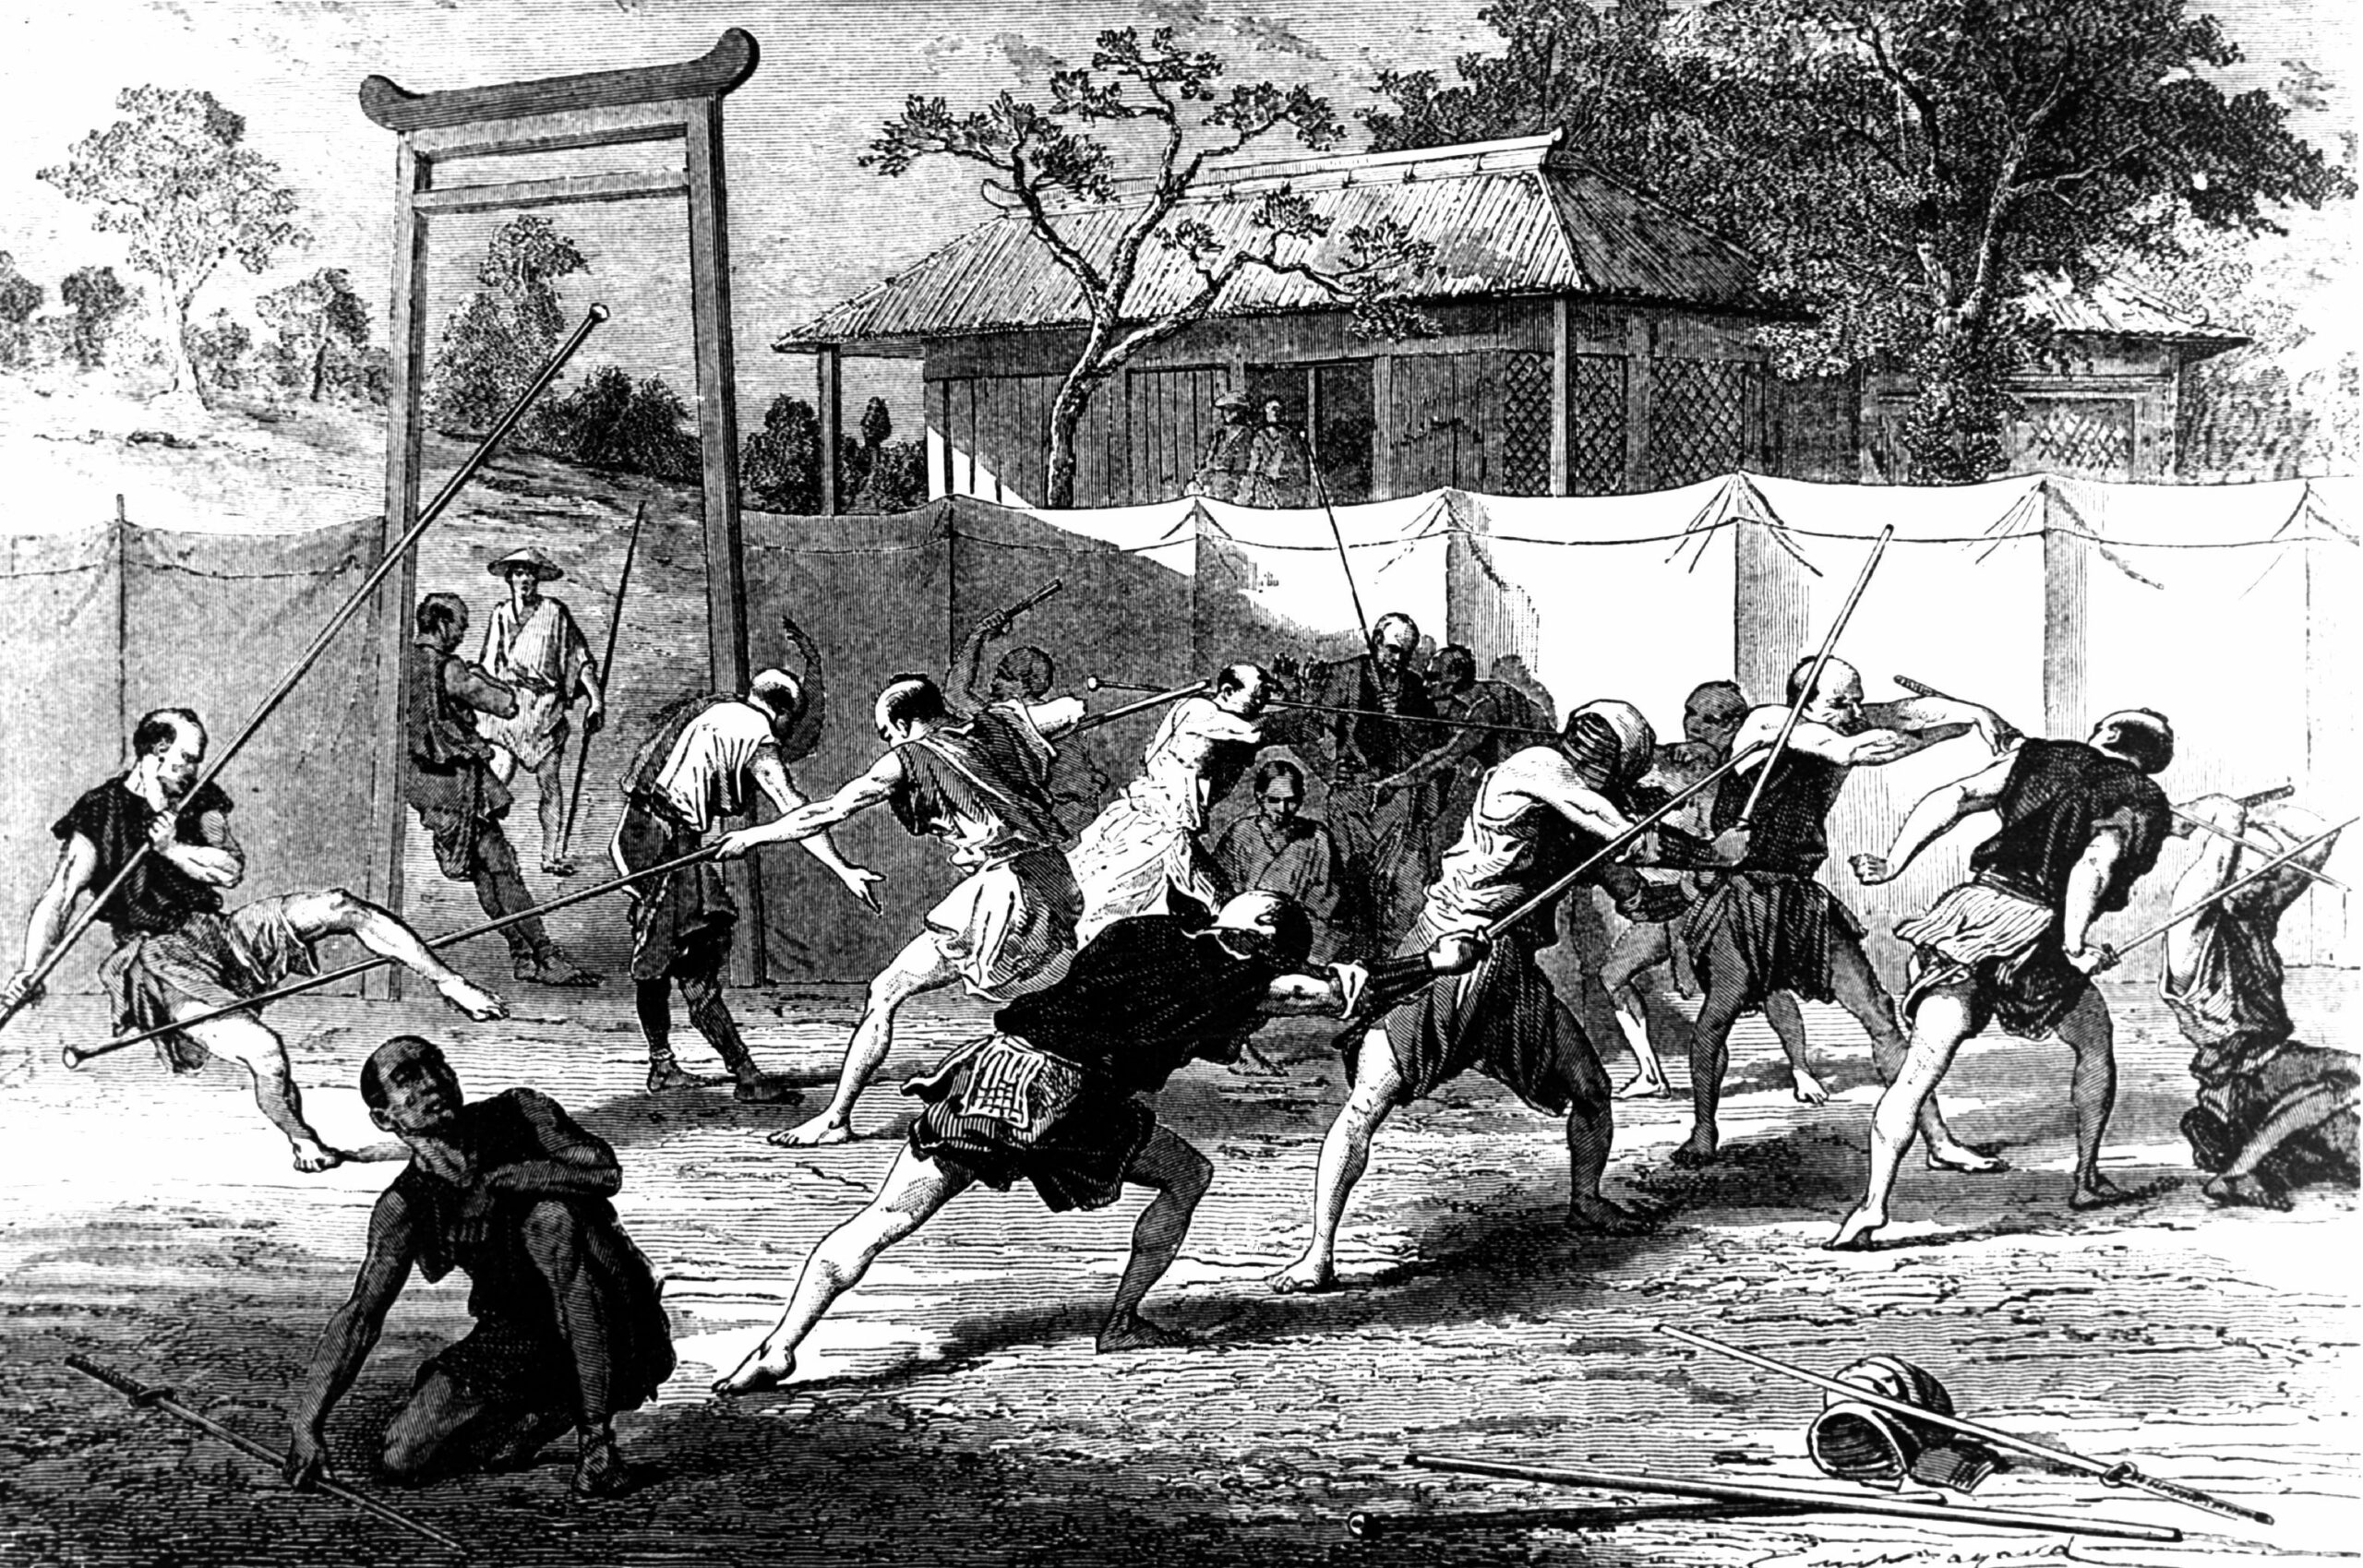 A black and white drawing depicting the training of samurai in their early stages.